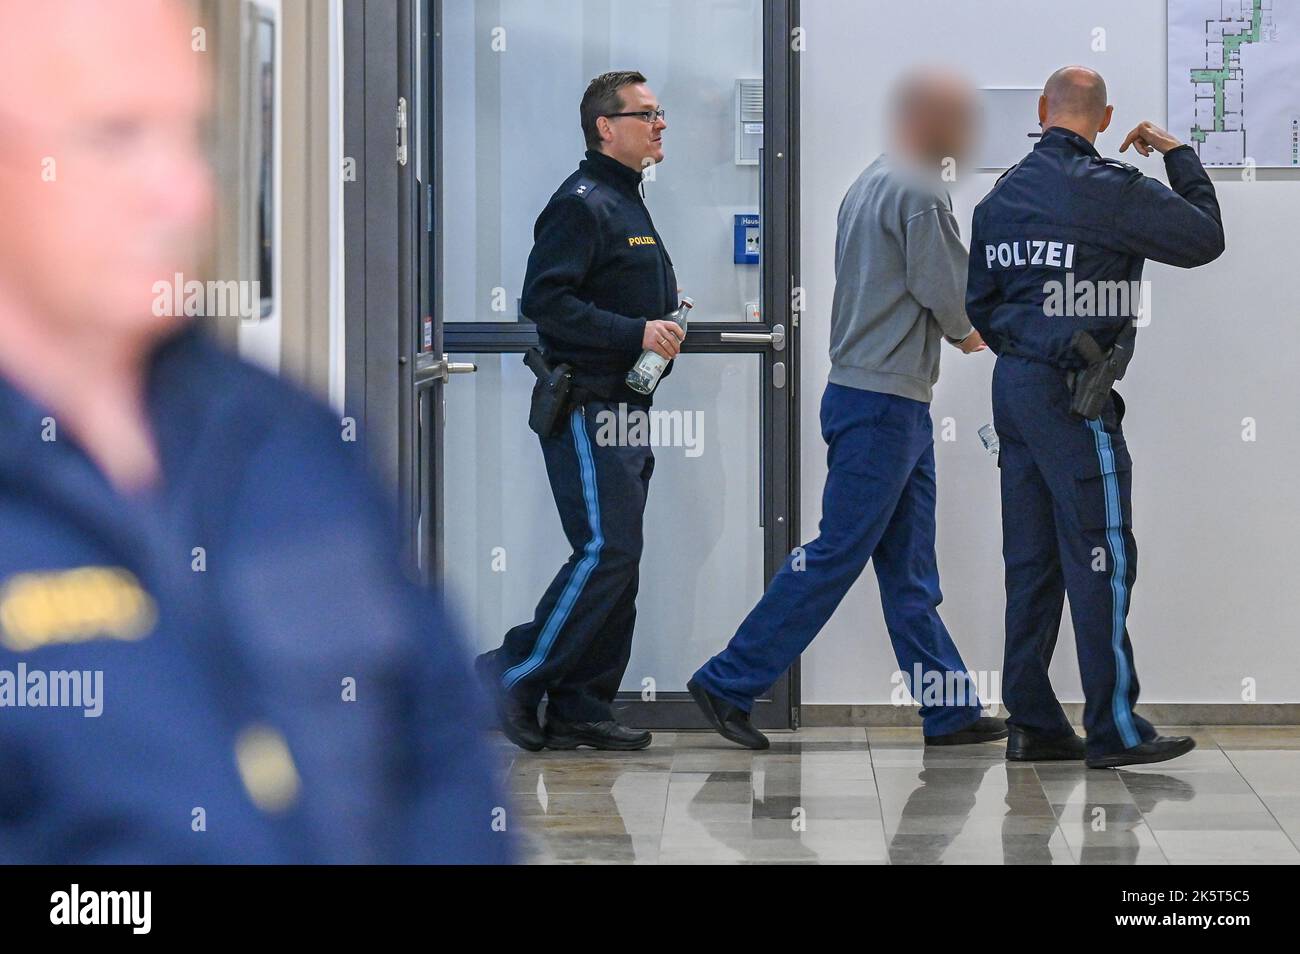 Deggendorf, Germany. 10th Oct, 2022. The defendant (2nd from right) is led by police officers into the hearing room of the district court. Credit: Armin Weigel/dpa - Nutzung nur nach schriftlicher Vereinbarung mit der dpa/Alamy Live News Stock Photo